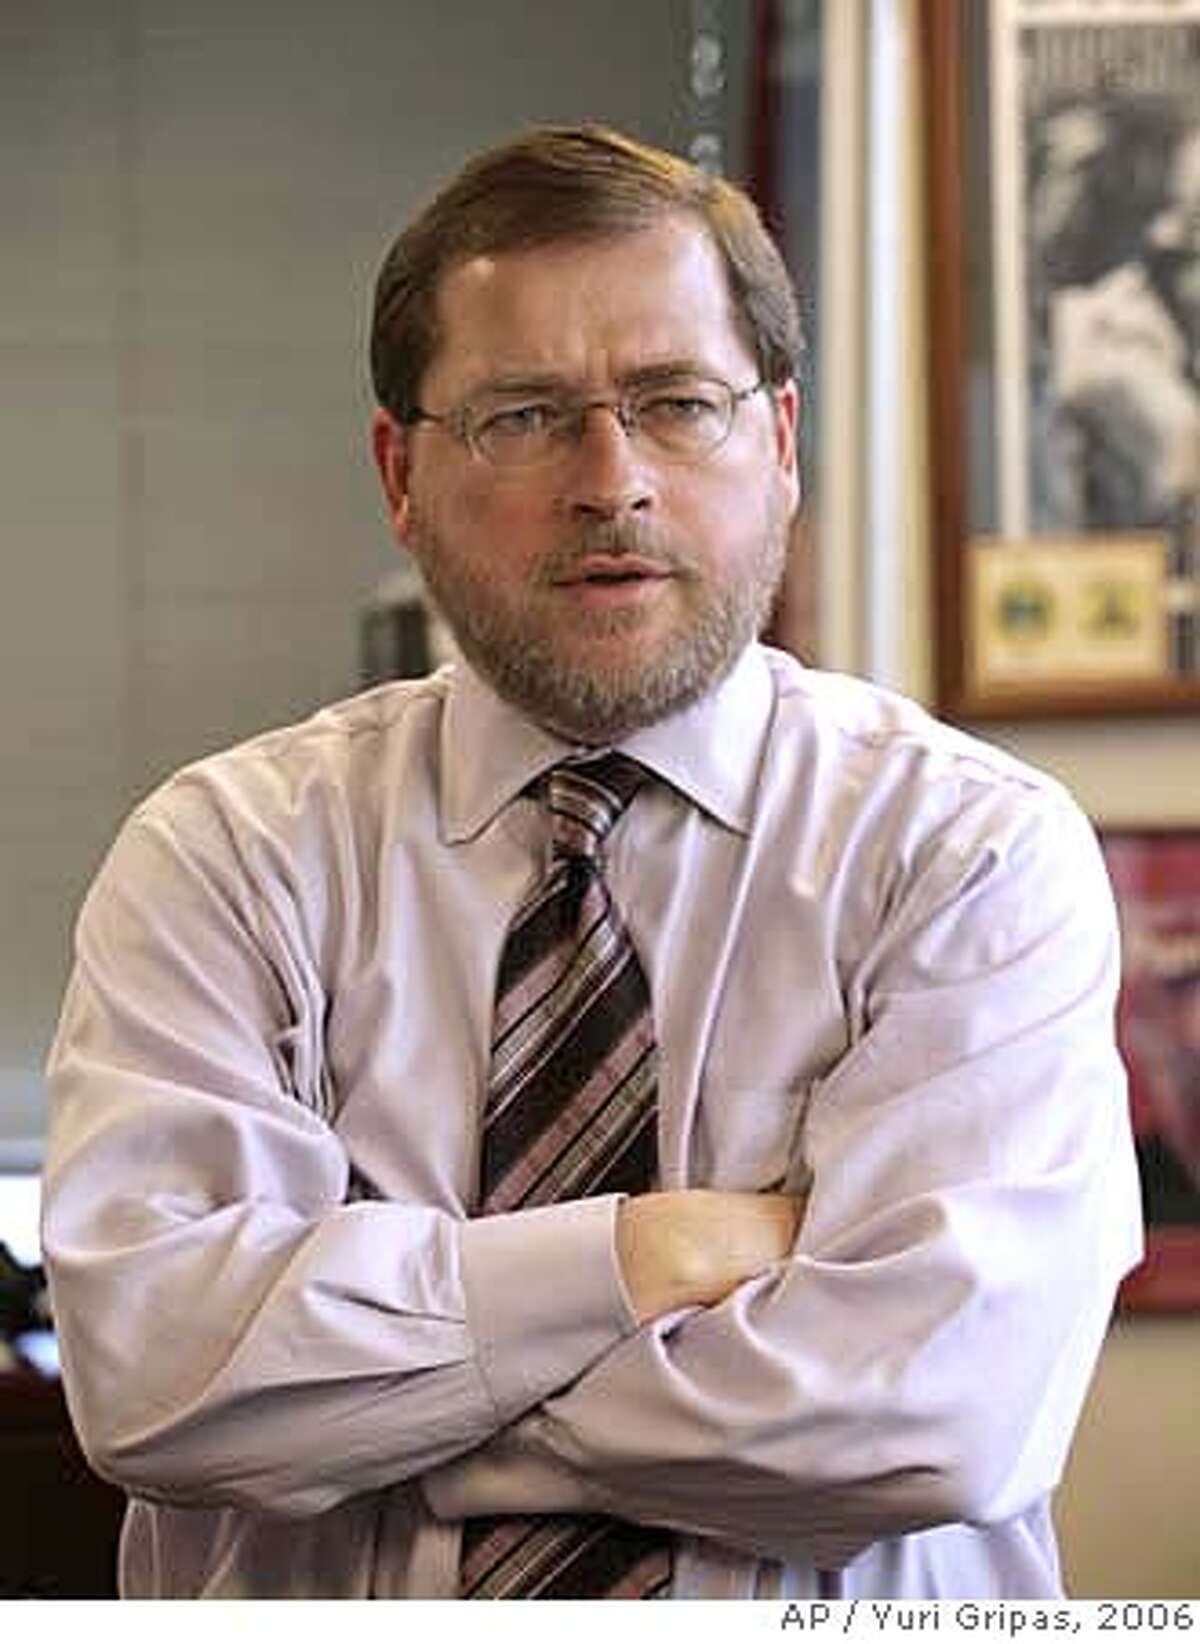 *** FILE *** Conservative activist Grover Norquist, President of the Americans for Tax Reform, stands in his office in Washington Thursday, Jan. 26, 2006. Republican activists Grover Norquist and Ralph Reed landed more than 100 meetings inside the Bush White House, according to documents released Wednesday Sept. 20, 2006 that provide the first official accounting of the access and influence the two presidential allies have enjoyed. (AP Photo/Yuri Gripas) Ran on: 10-13-2006 Grover Norquist 2006 FILE PHOTO